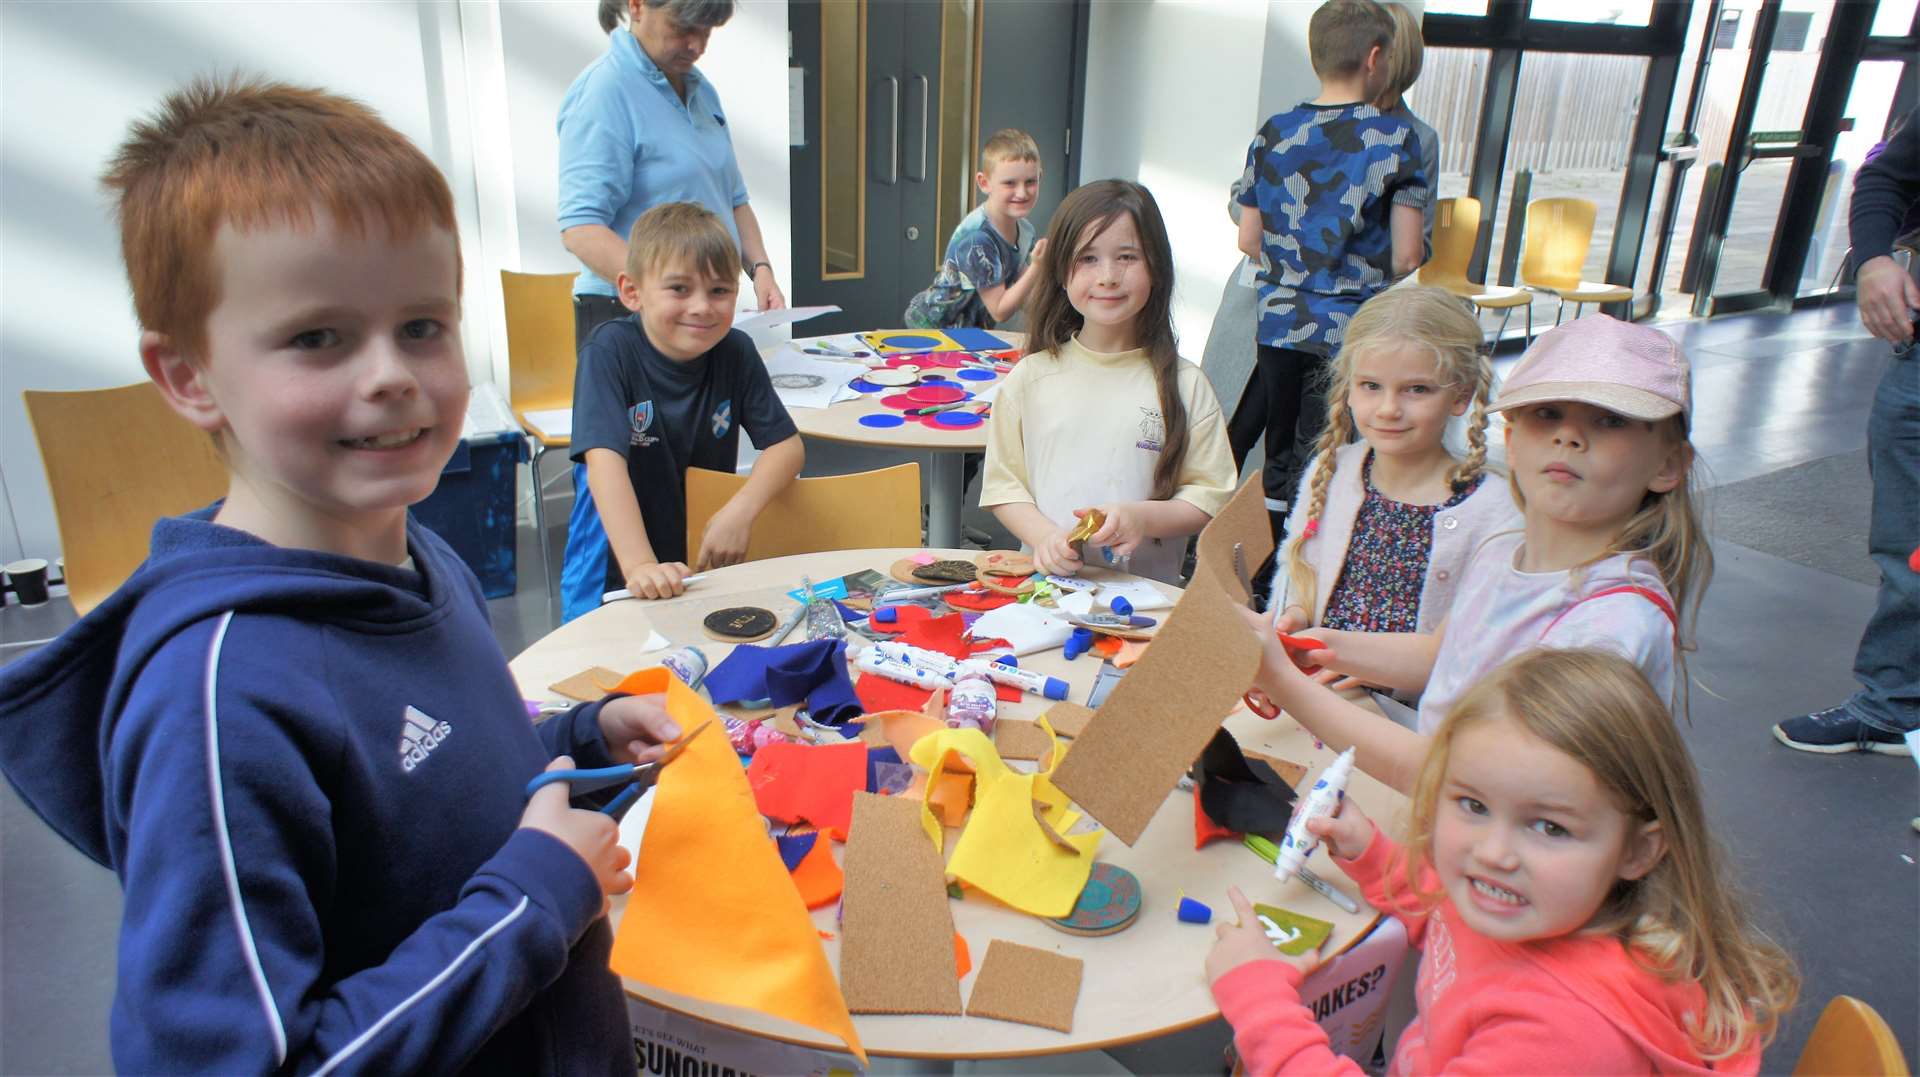 There were many activities for children to get involved in at Caithness International Science Festival 2022. Picture: DGS